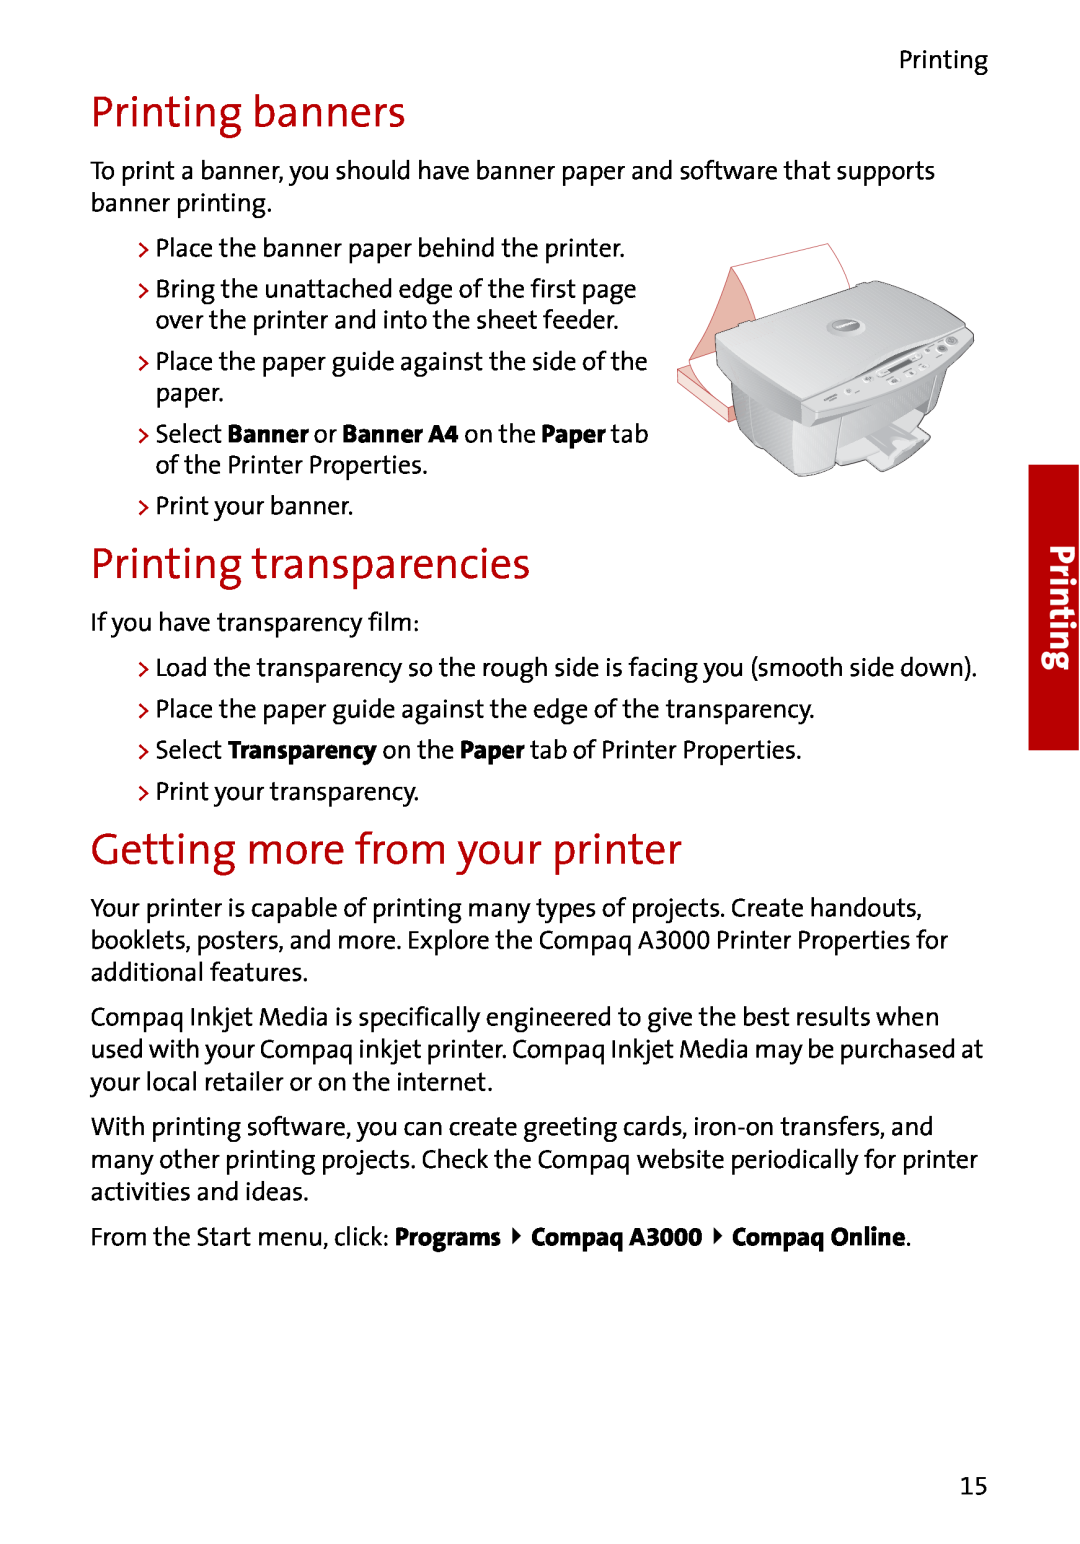 Compaq A3000 manual Printing banners, Printing transparencies, Getting more from your printer 